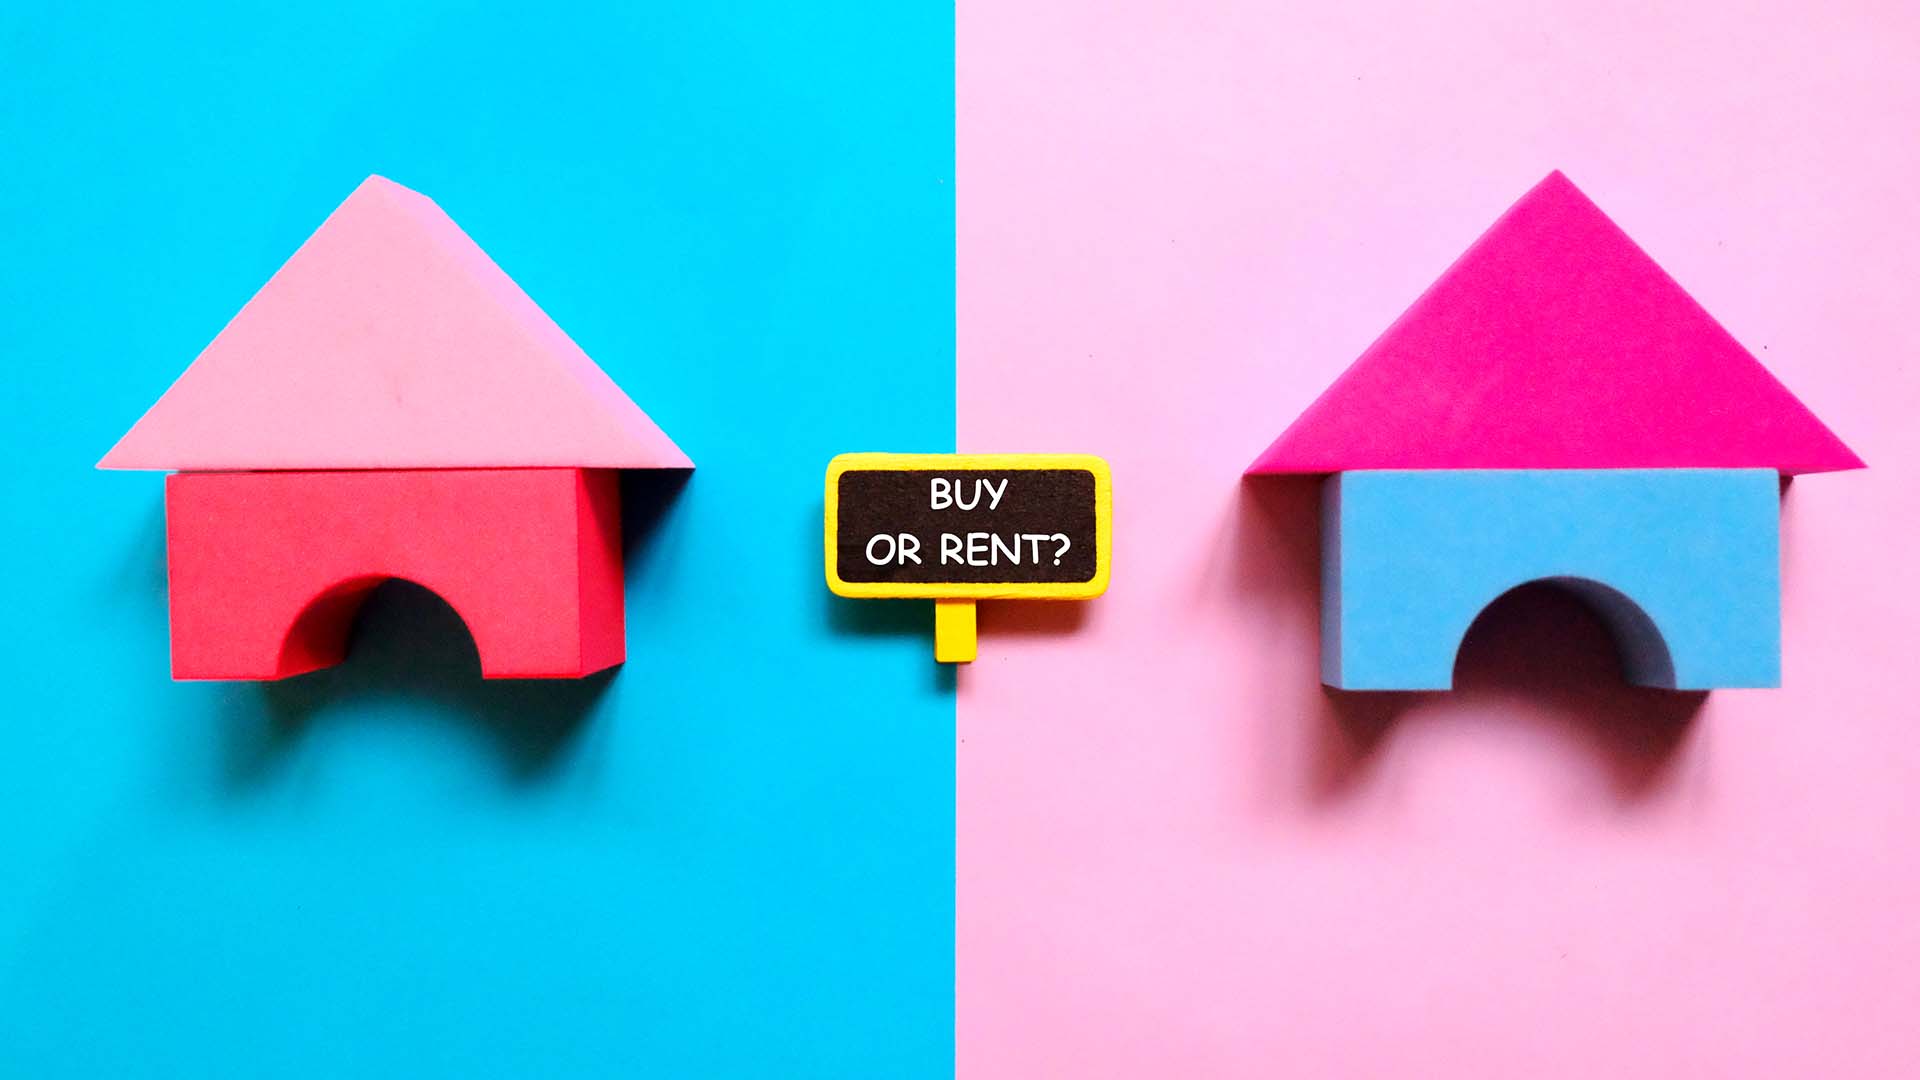 It&#8217;s cheaper to rent than to buy a home. Here&#8217;s advice for those weighing options